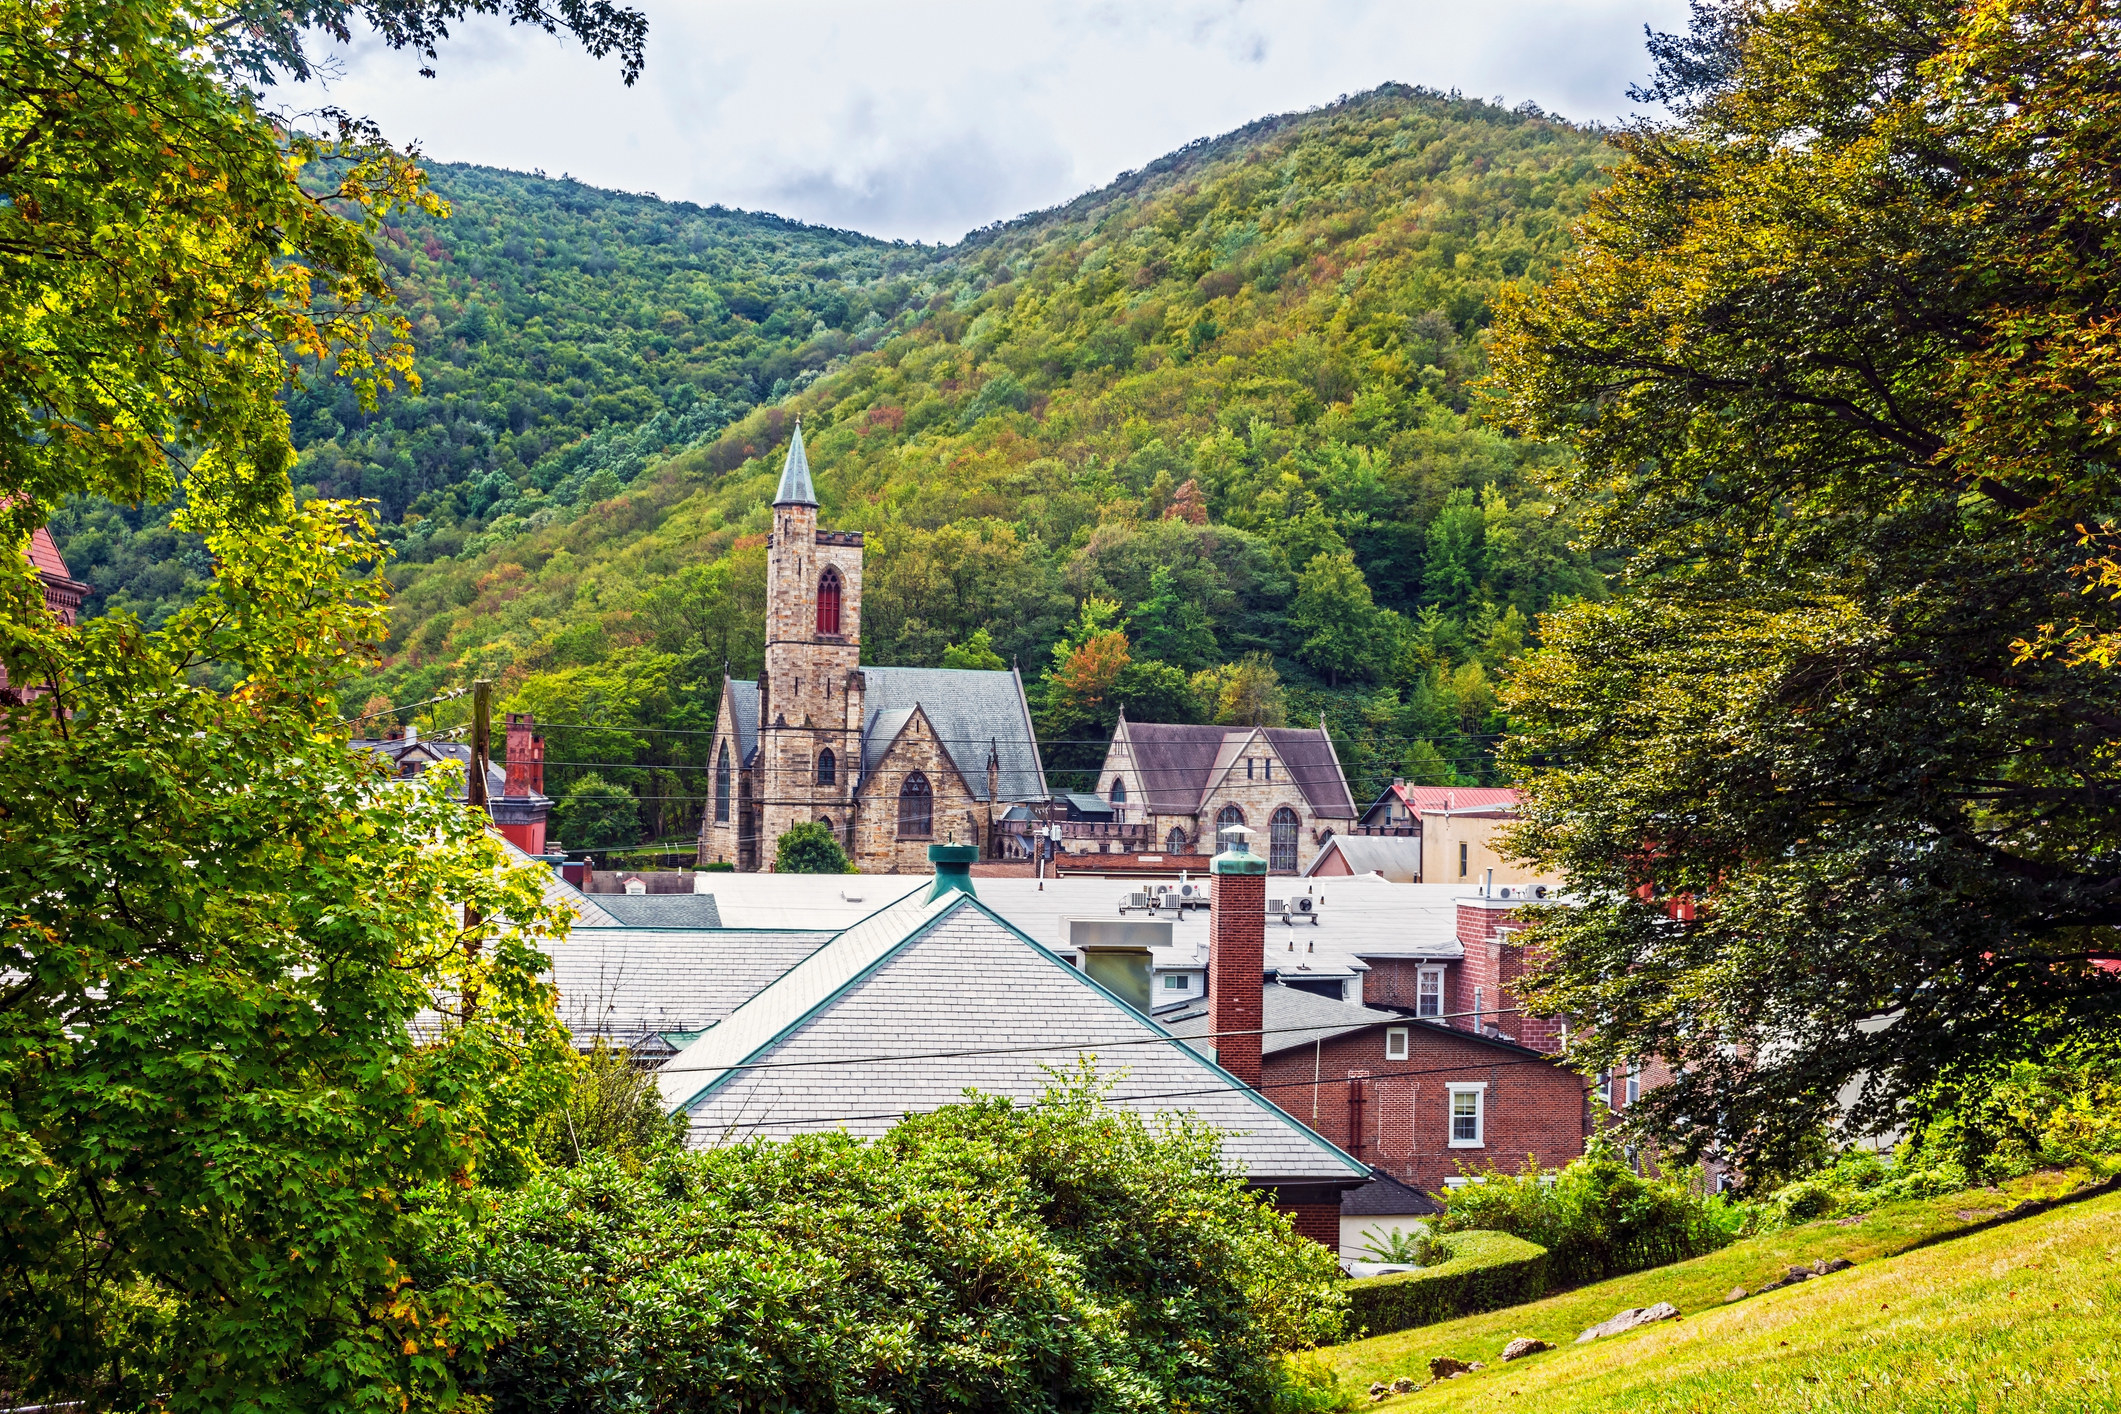 Historic old buildings and the scenic landscape of Jim Thorpe Pennsylvania.